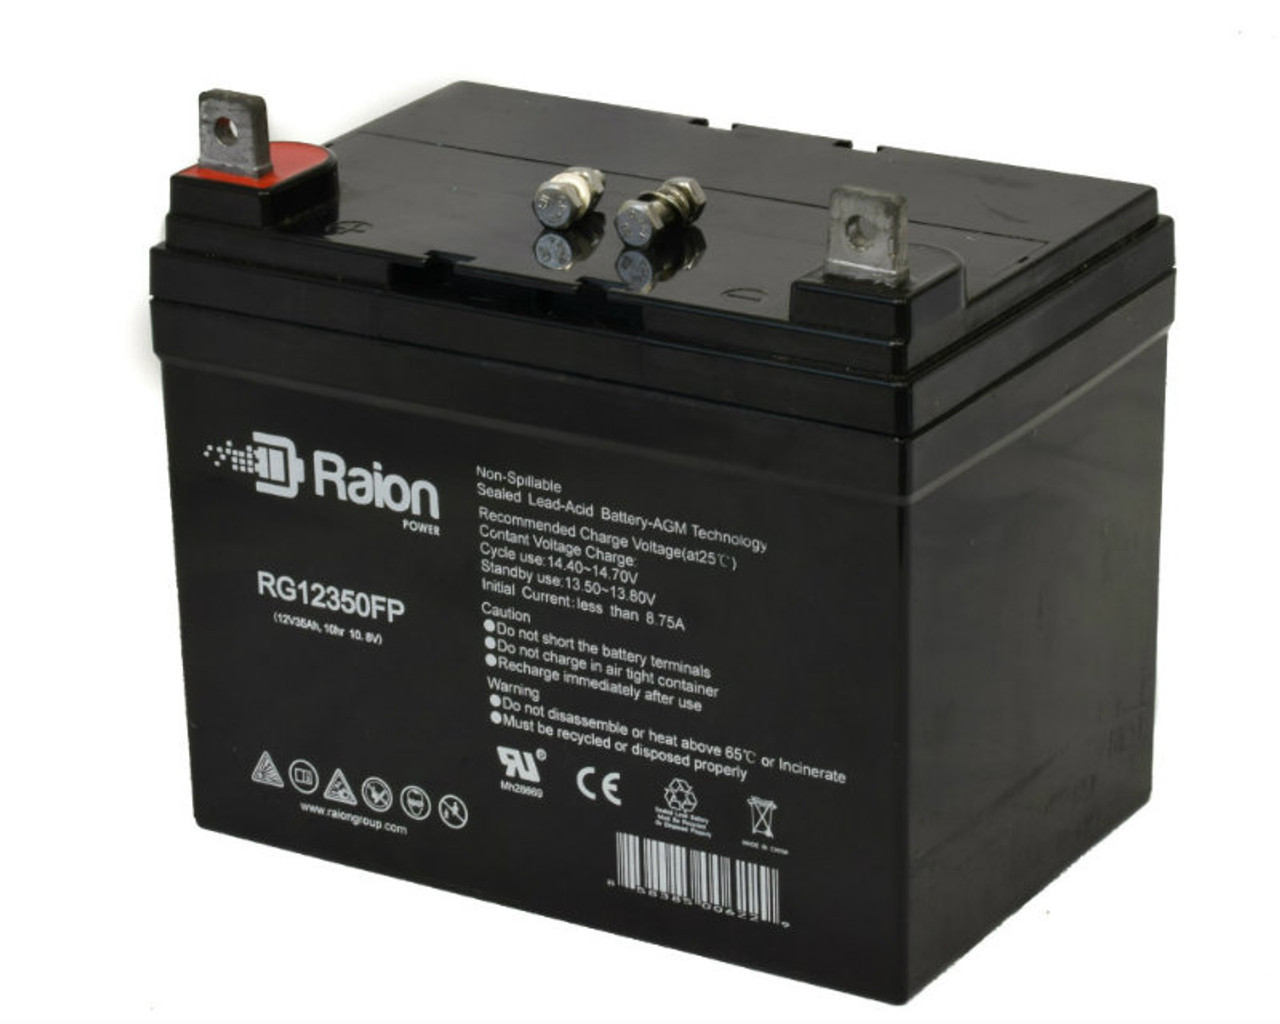 Raion Power Replacement 12V 35Ah Battery for Toro 520 HYDRO - 1 Pack